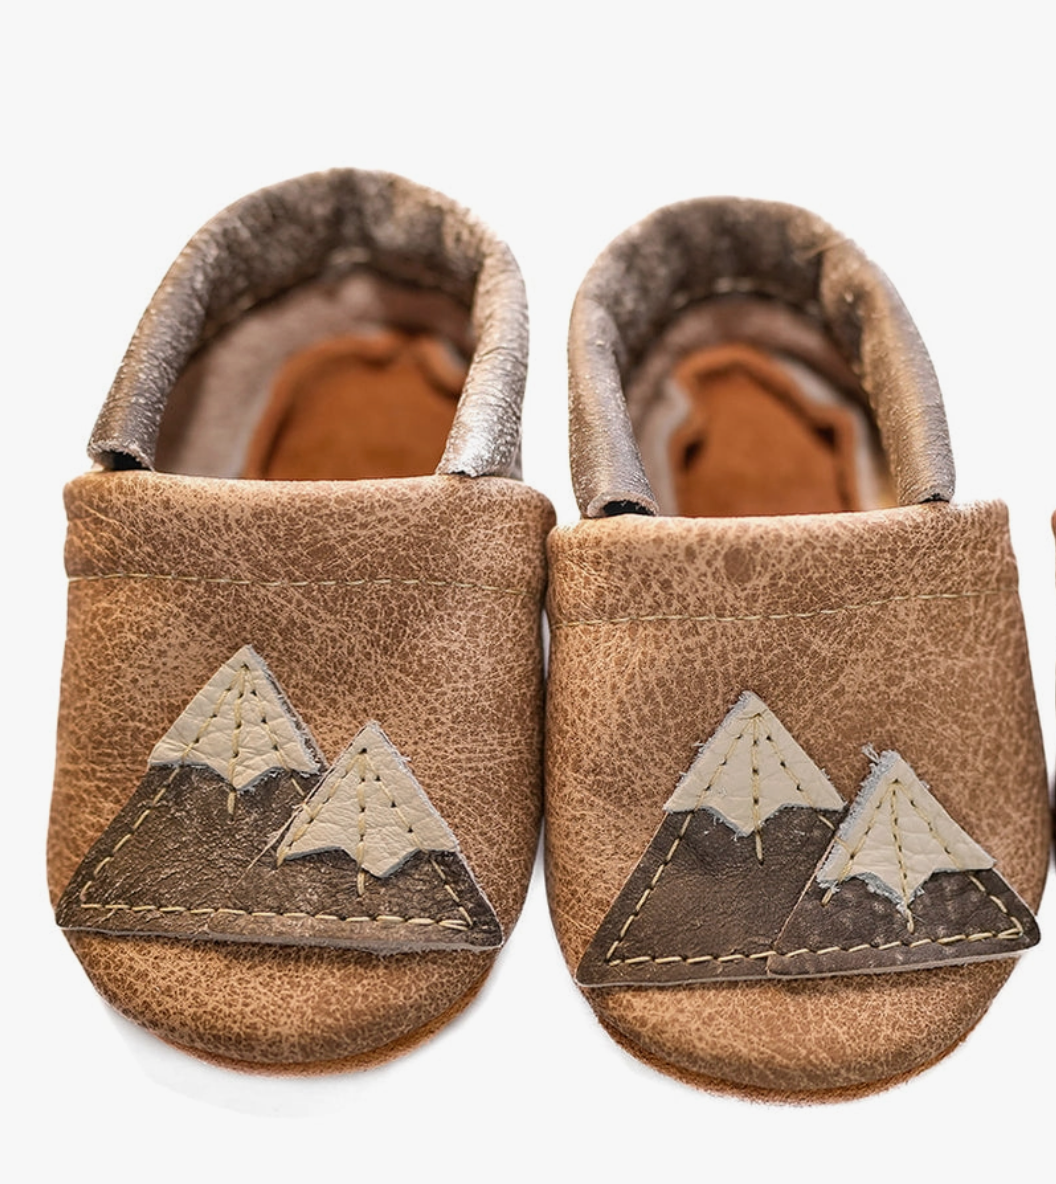 Shoes with Designs - Latte mtns